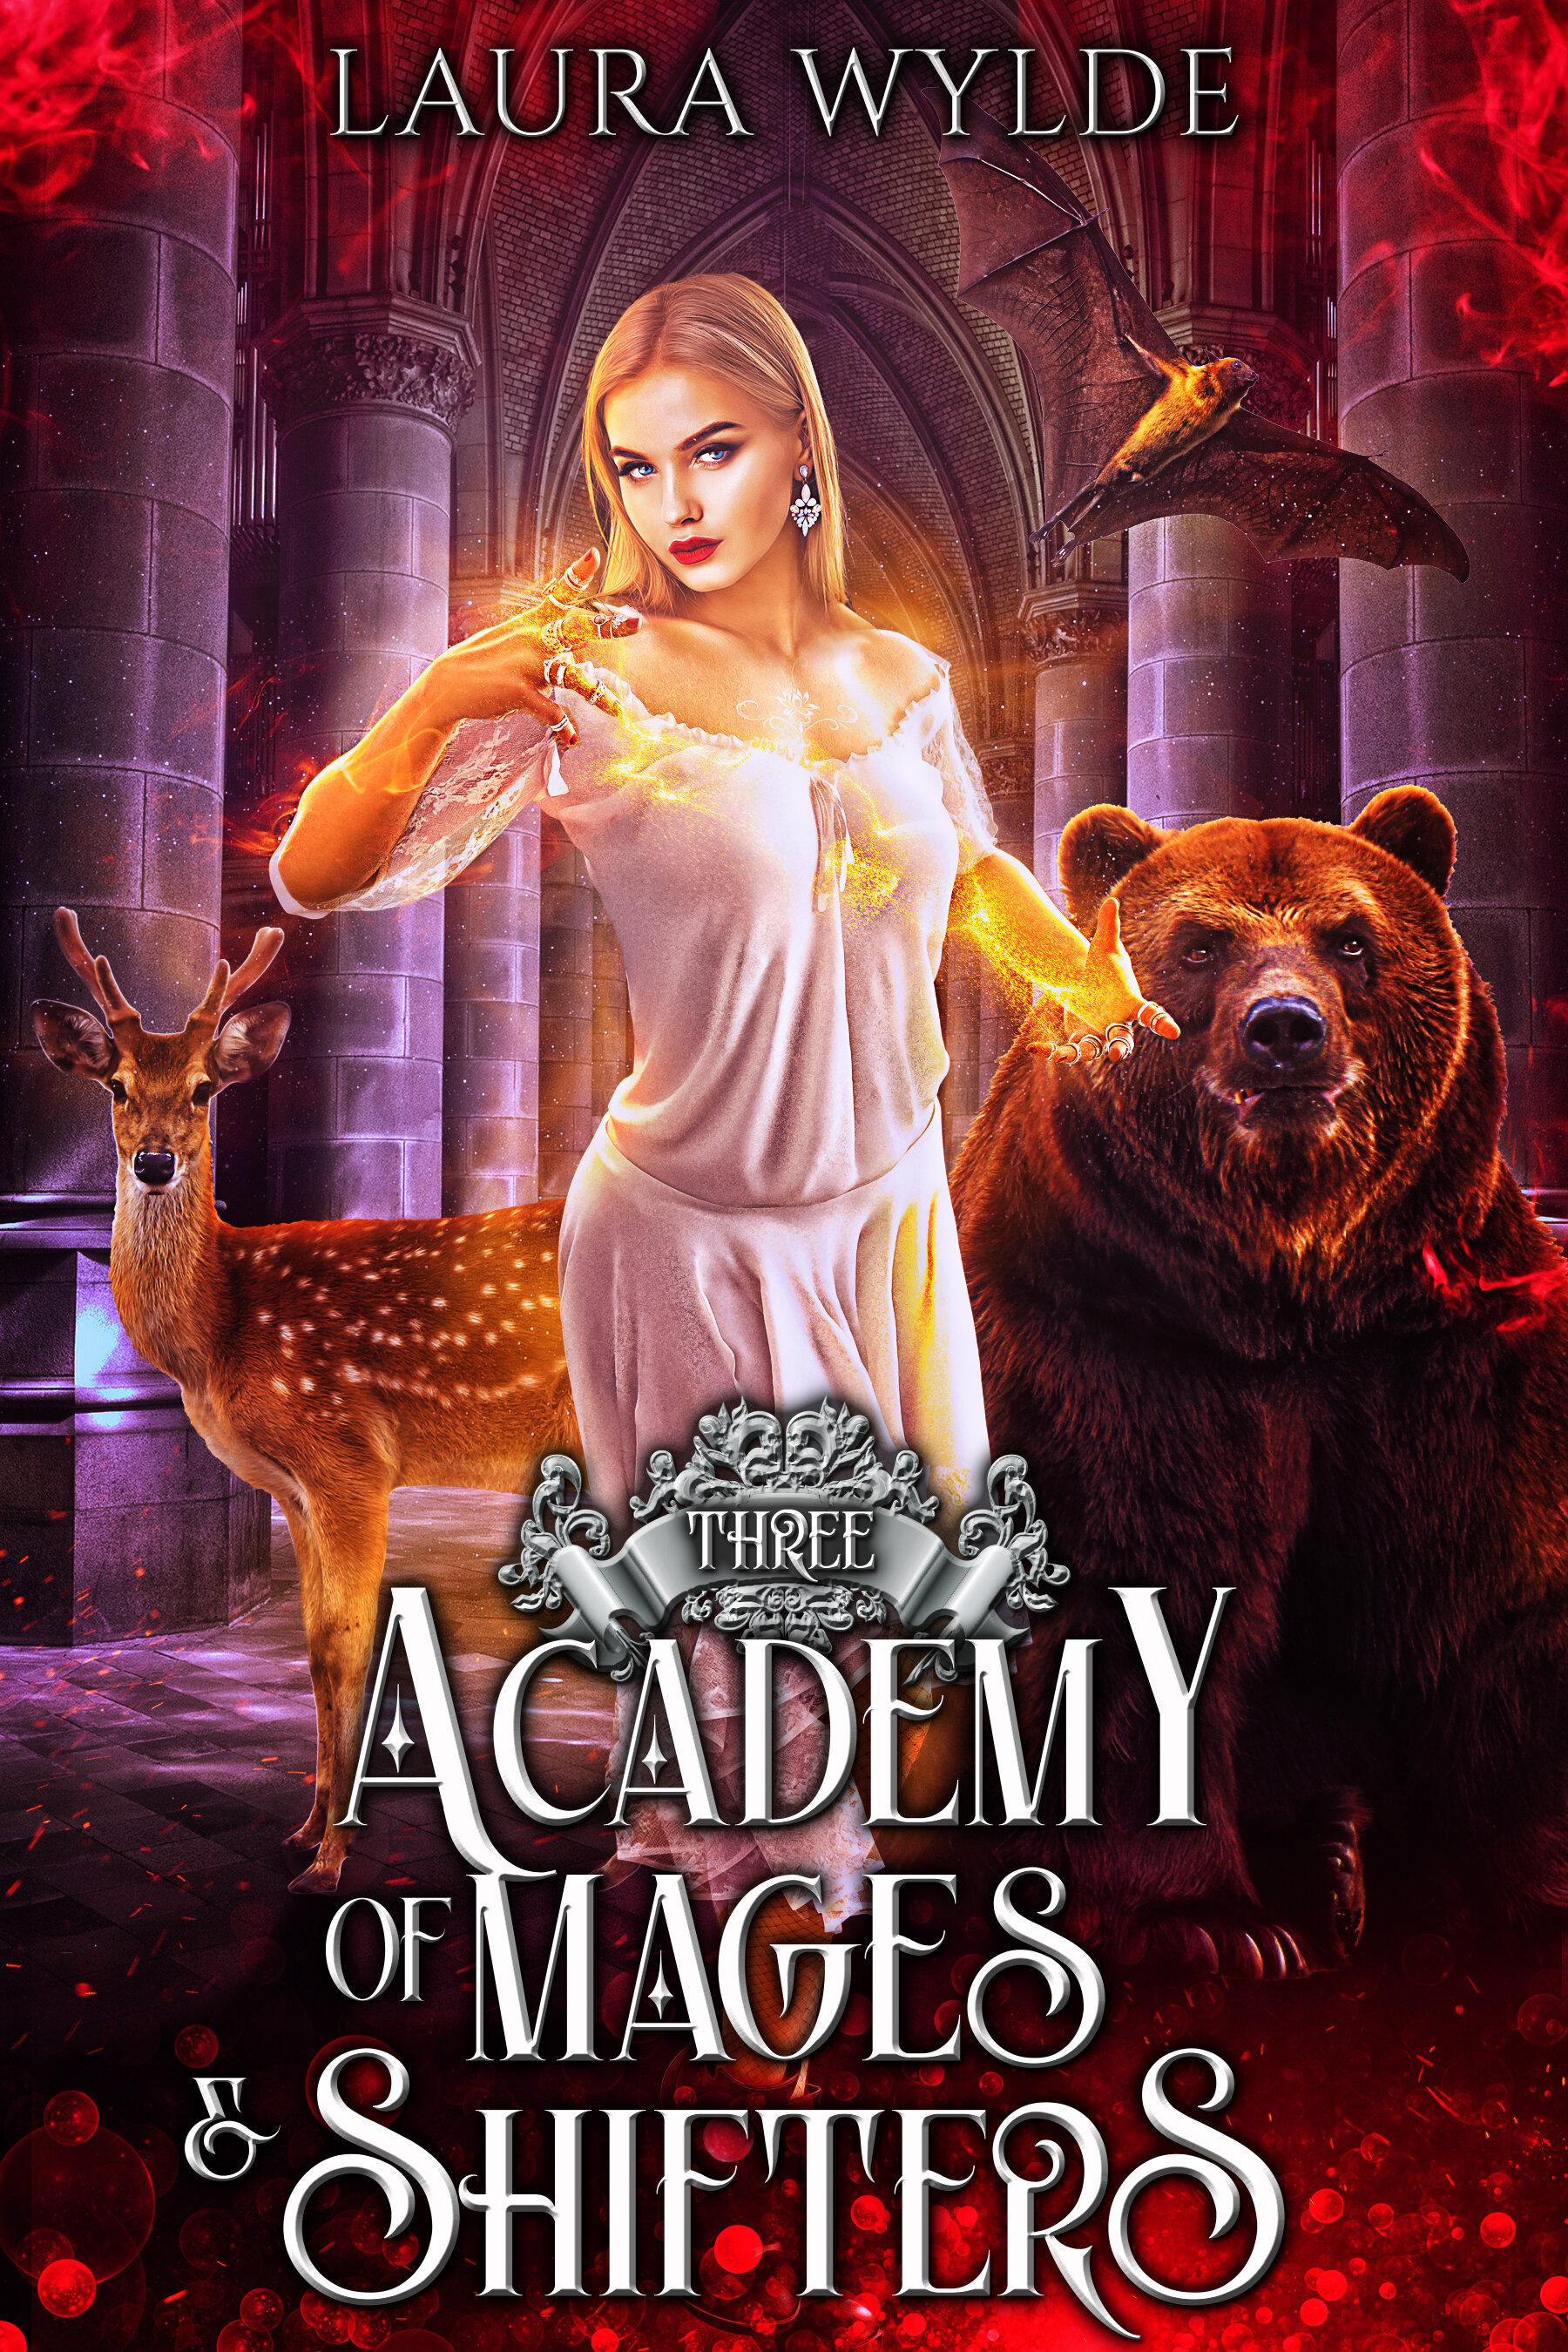 Laura Wylde - Academy of Mages & Shifters book 3 v1.jpg